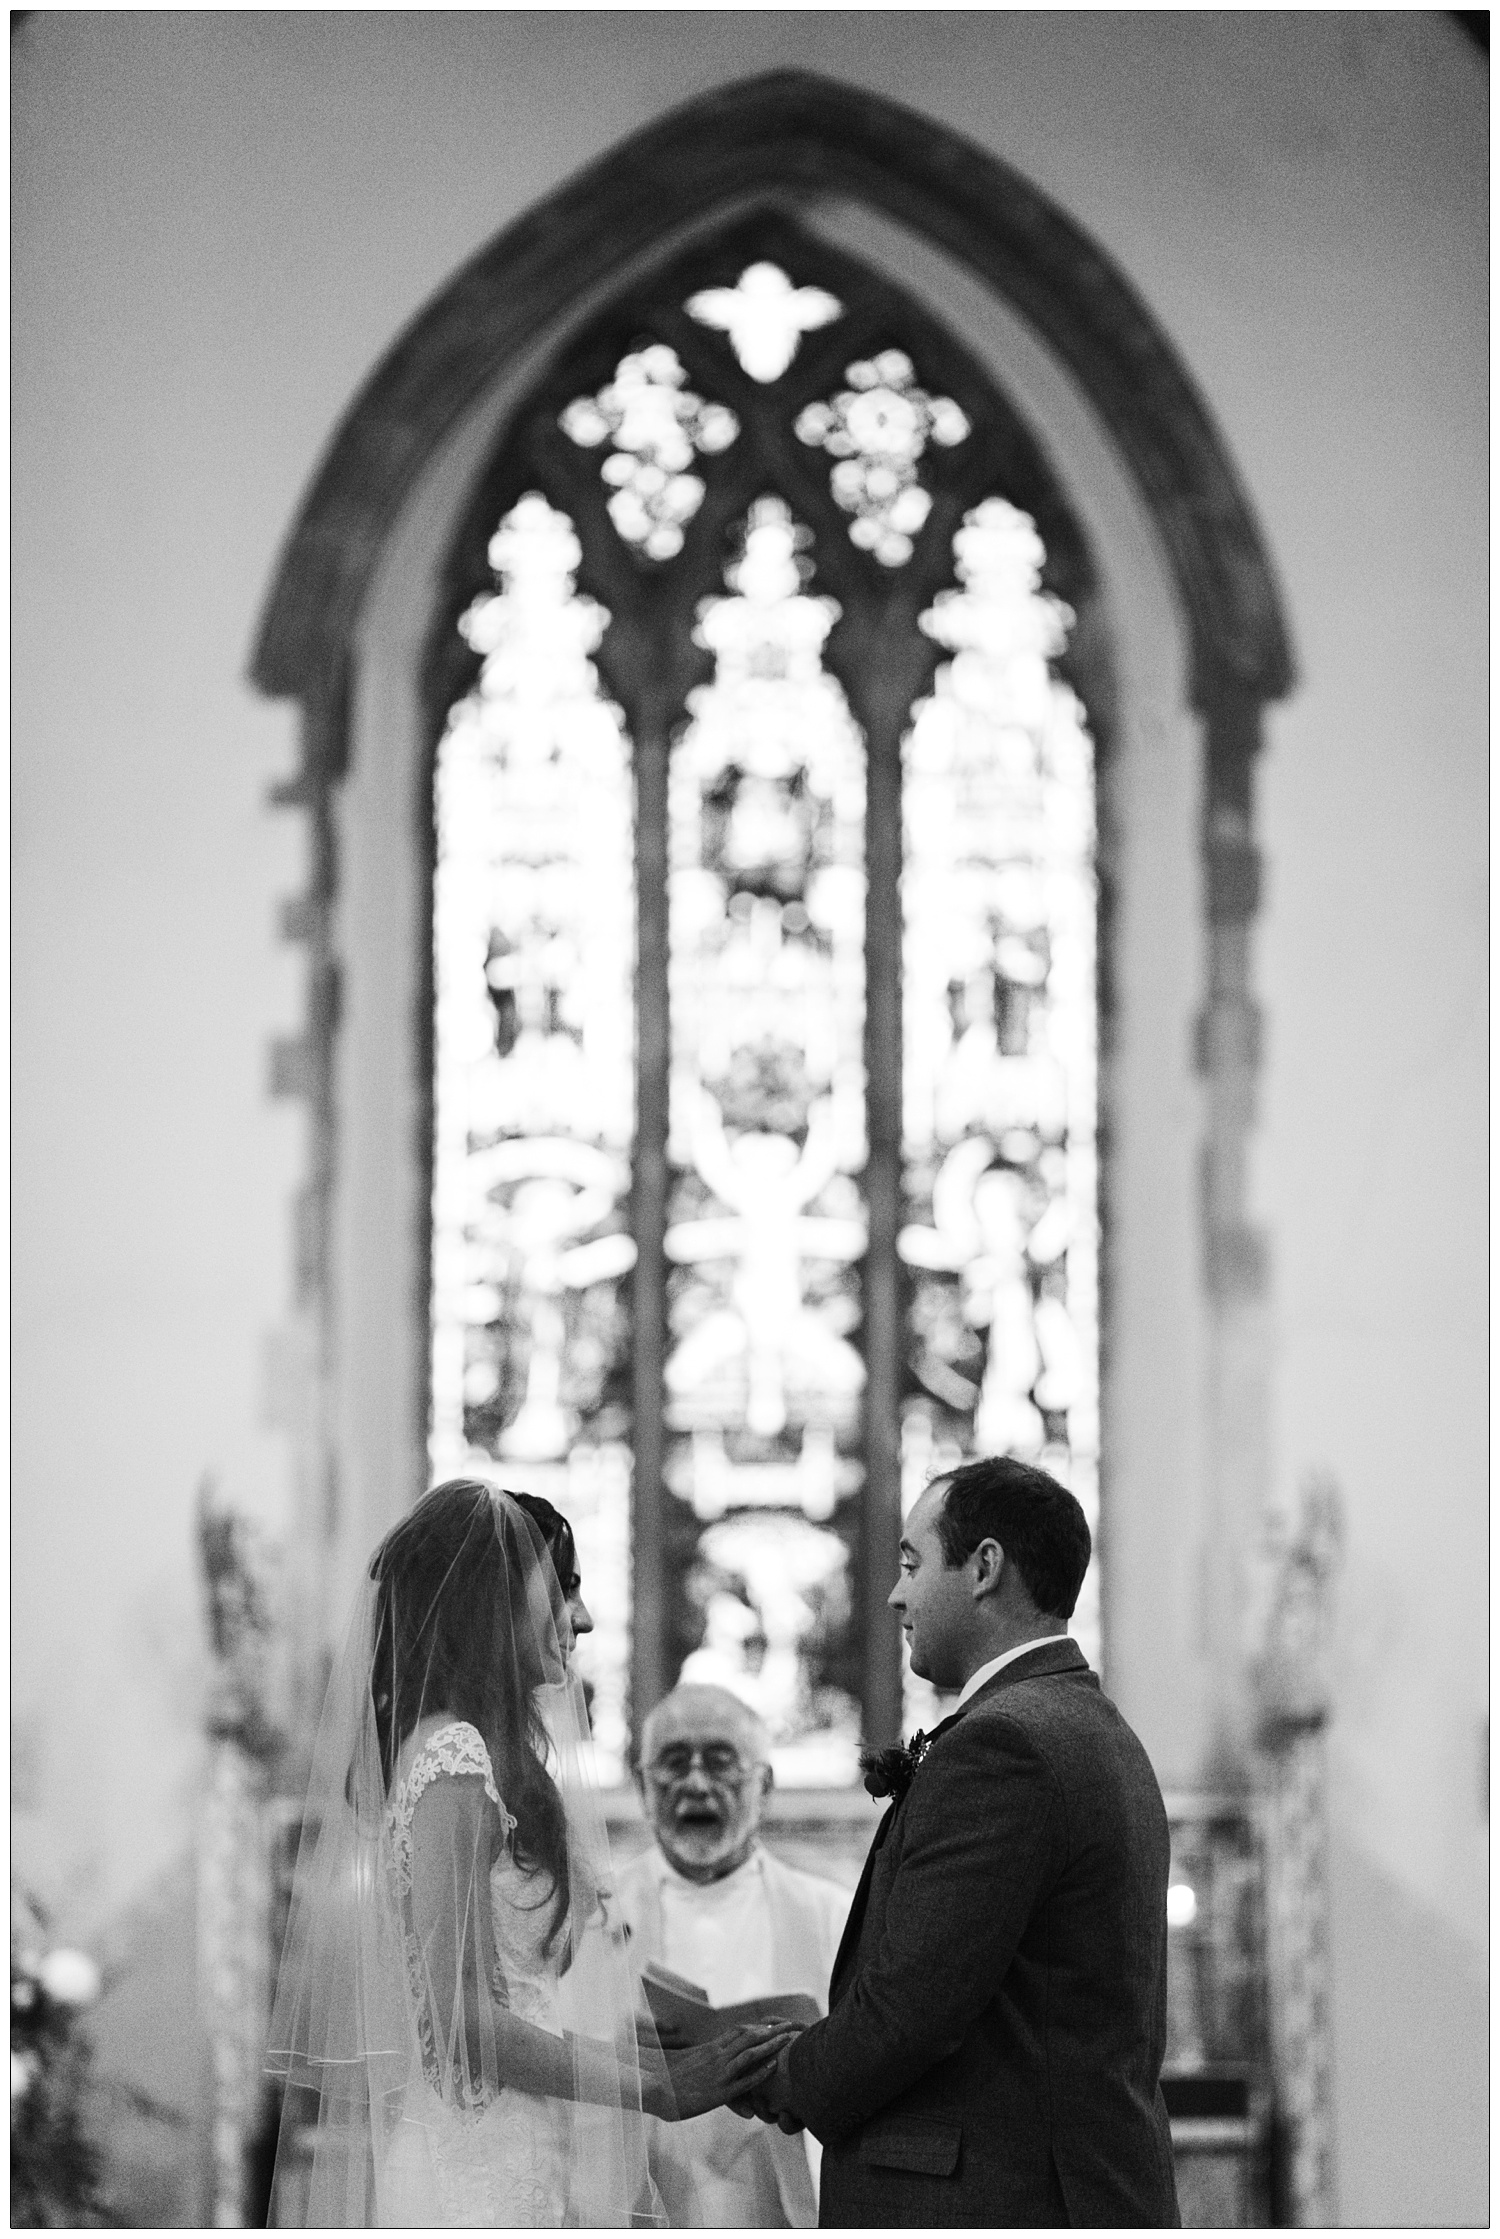 A couple hold hands in the All Saints Church in Purleigh. The vicar and window are in the background